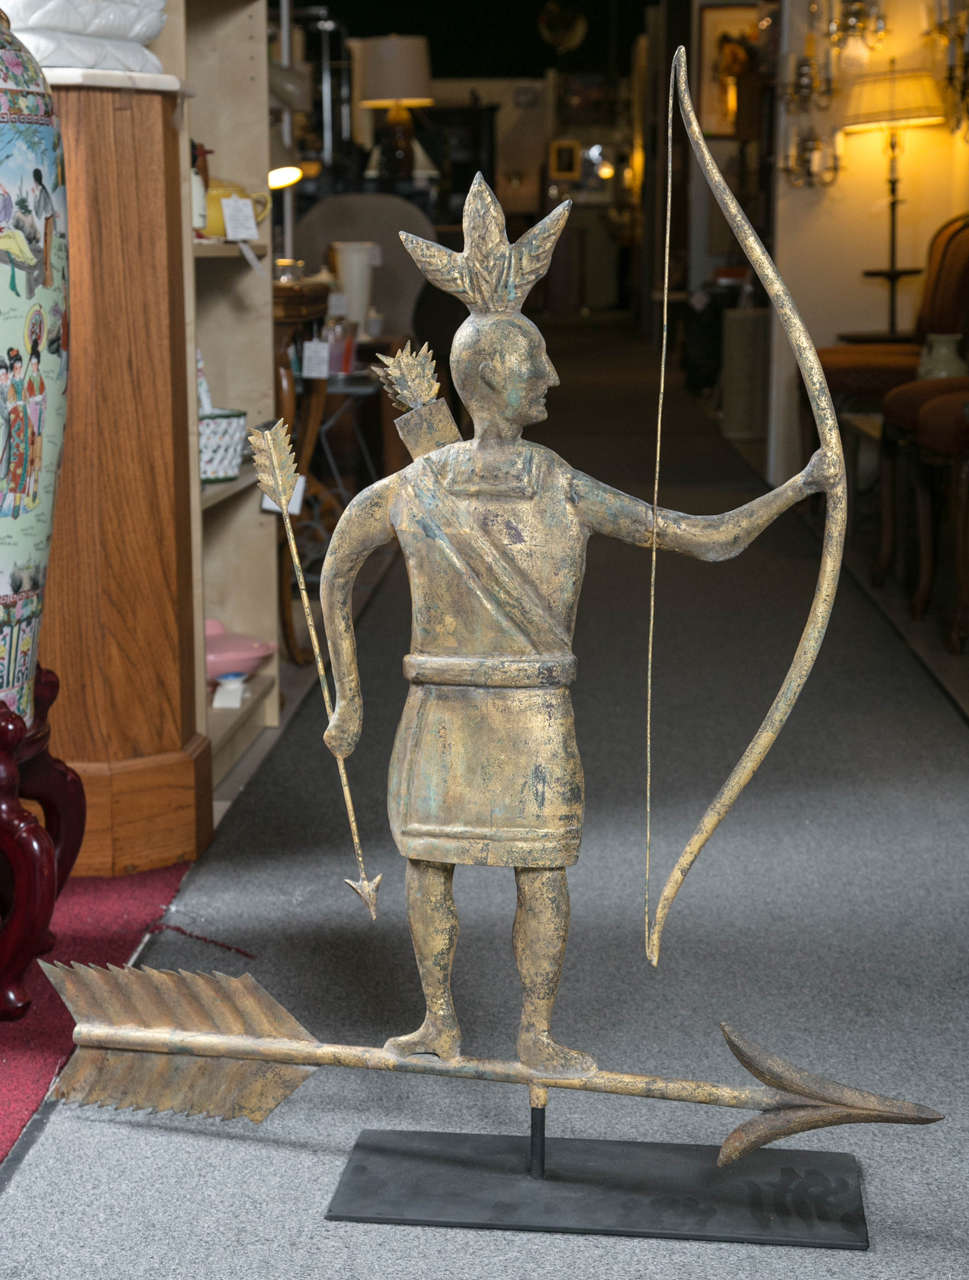 This copper weathervane is the Indian Massasoit who was the peacemaker with the pilgrims.  The arrow pointed down signifies 